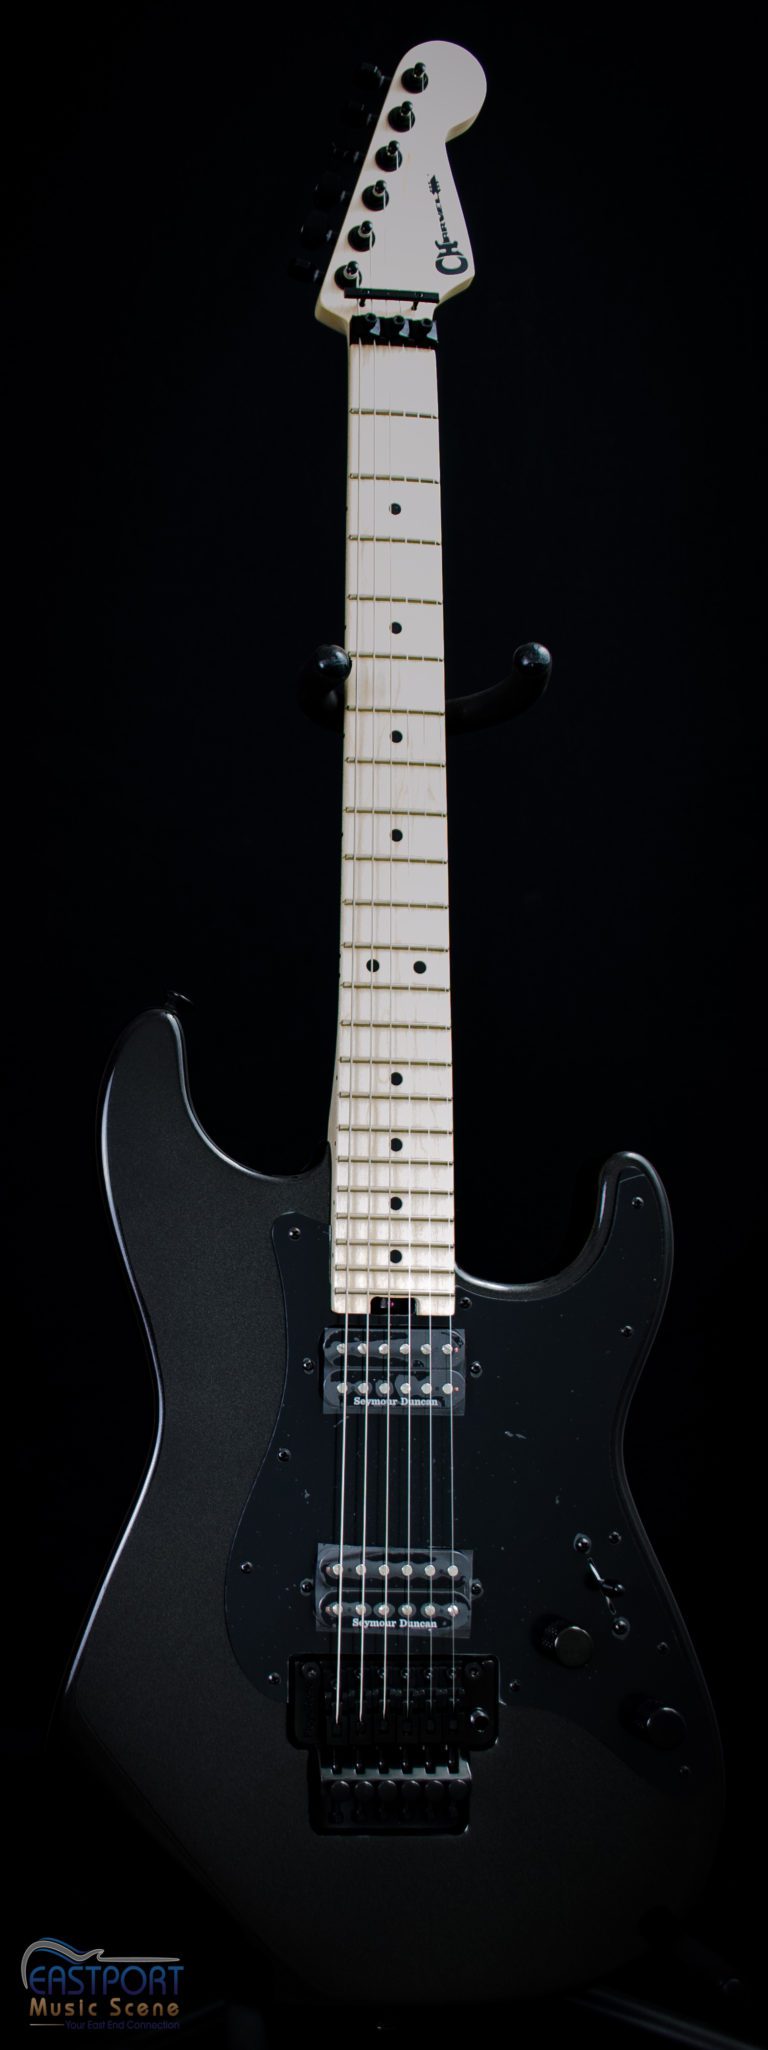 A black electric guitar with white strings and a black body.